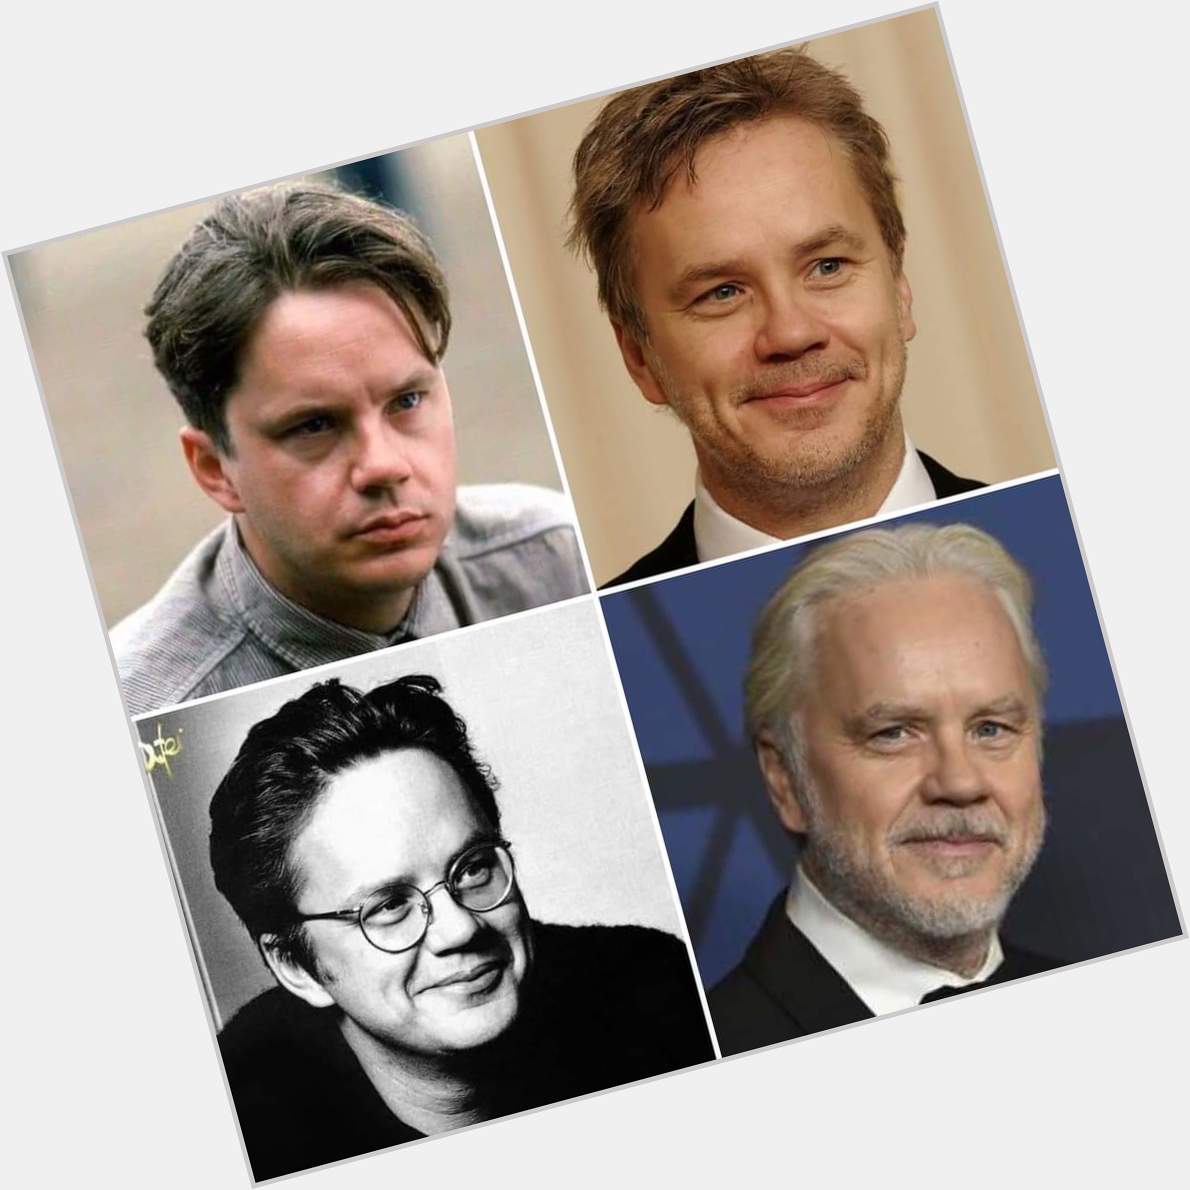 Happy Birthday Tim Robbins
Thank You for being Andy and Source of Inspiration 